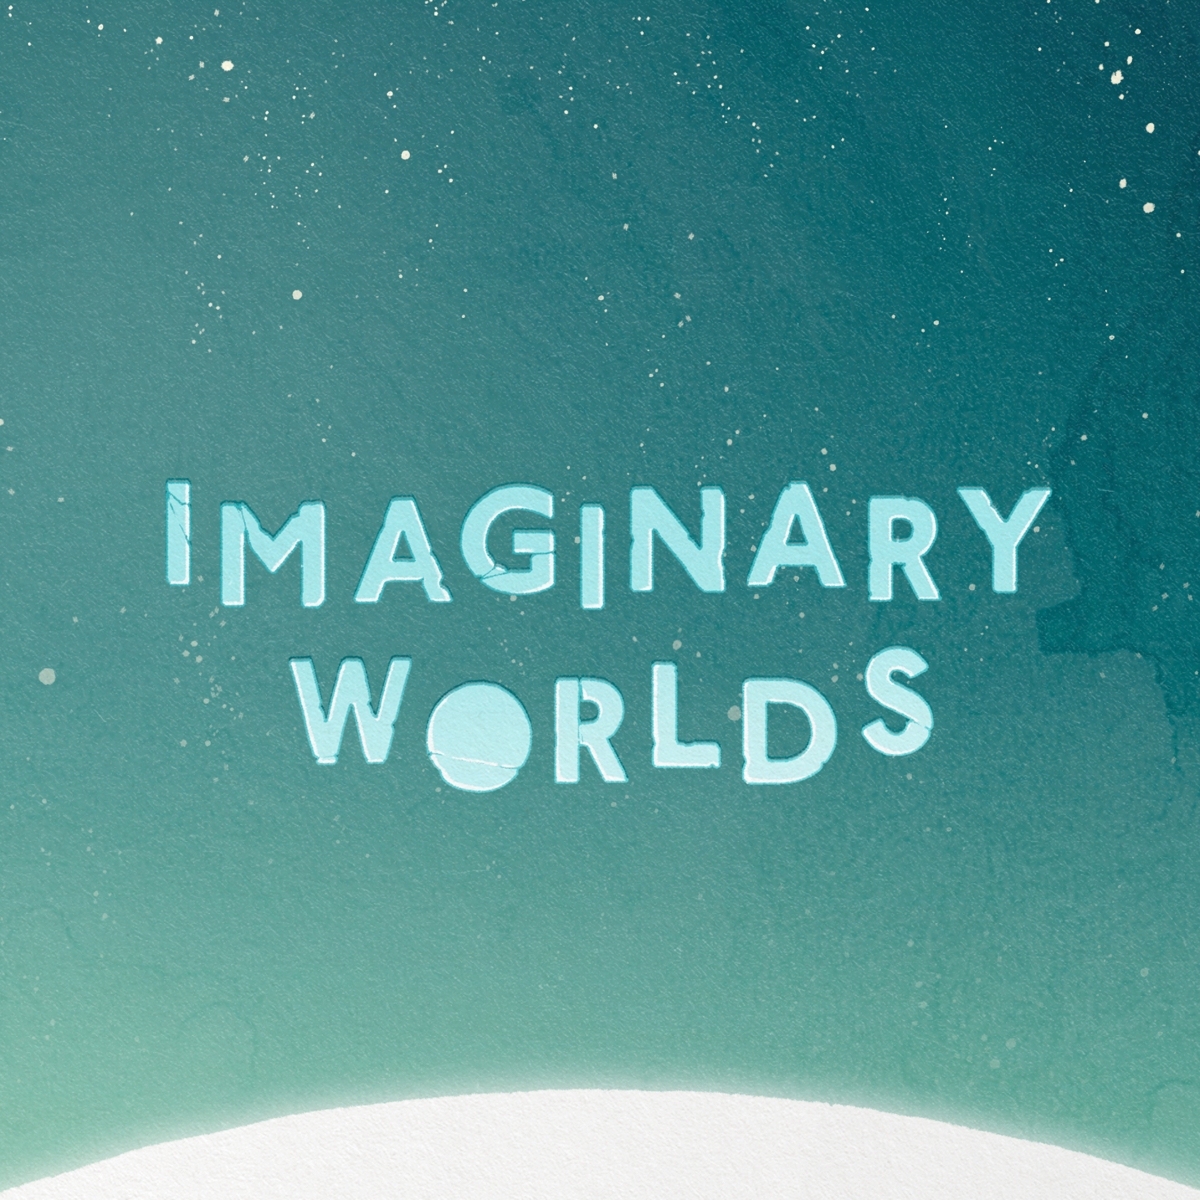 Illustrated Imaginary Worlds typography.